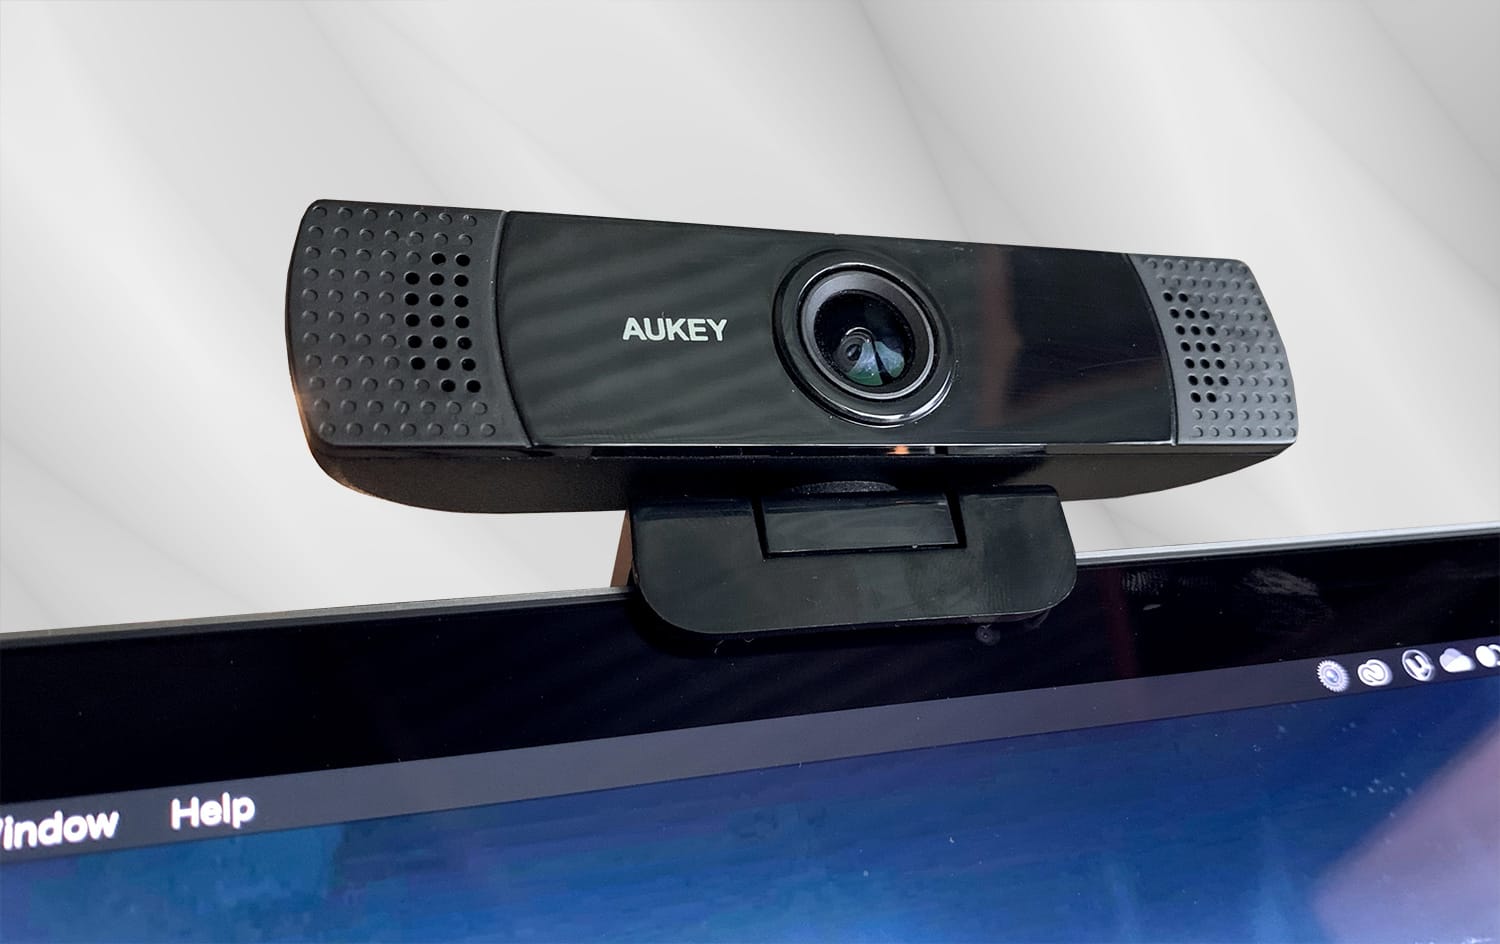 Look your best with this $15 Aukey 1080p webcam